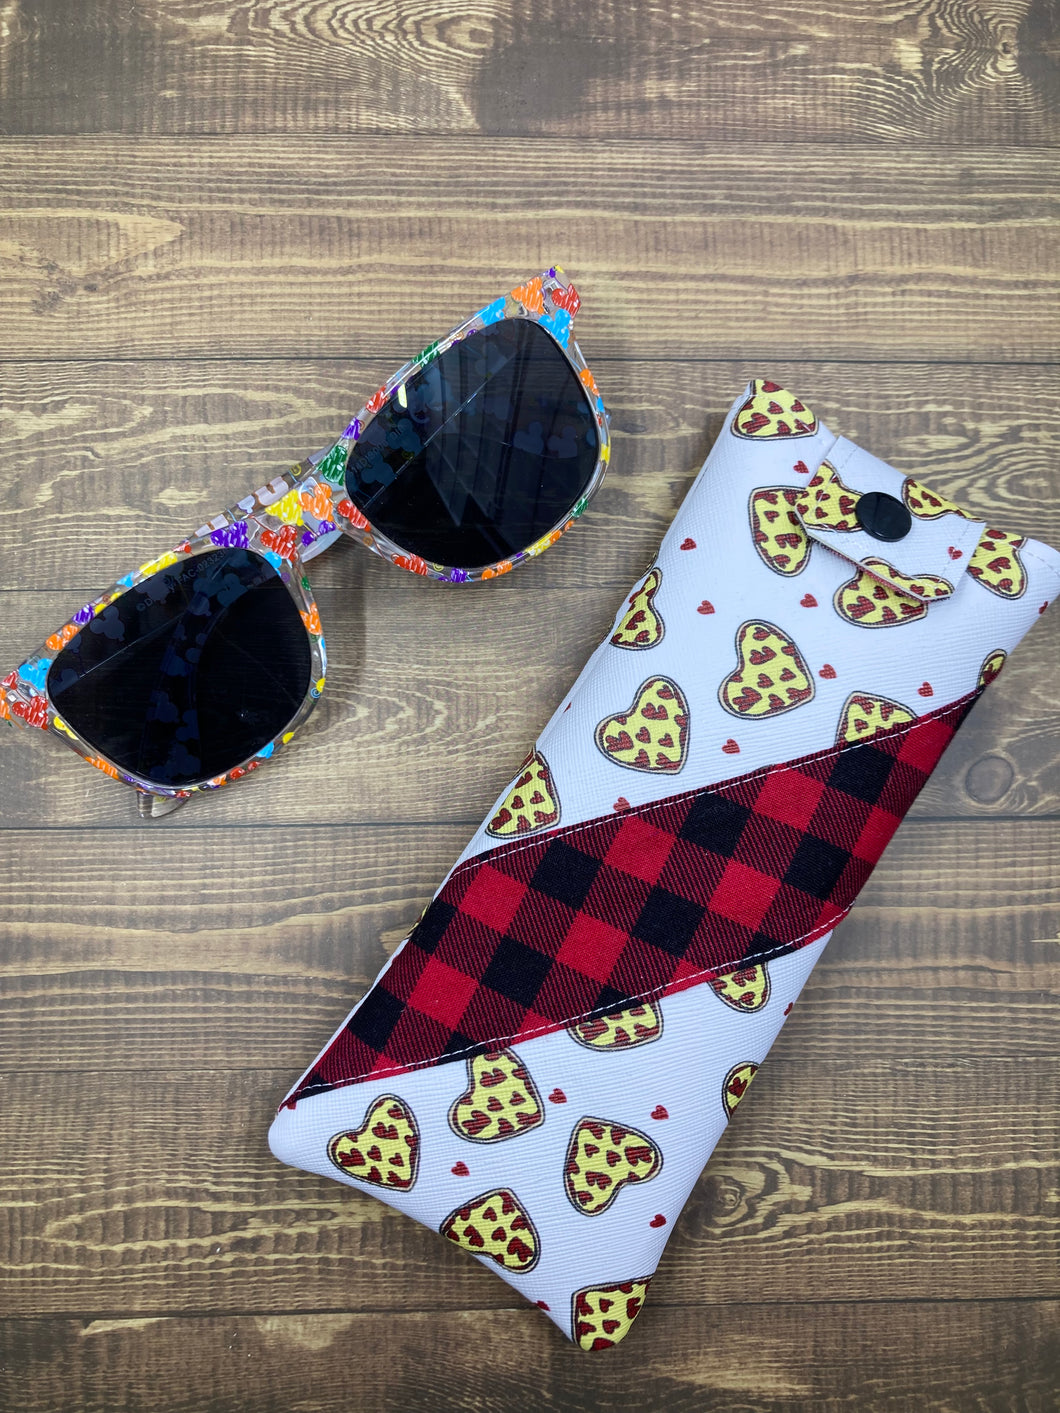 For the Love of Pizza ~ Glasses case